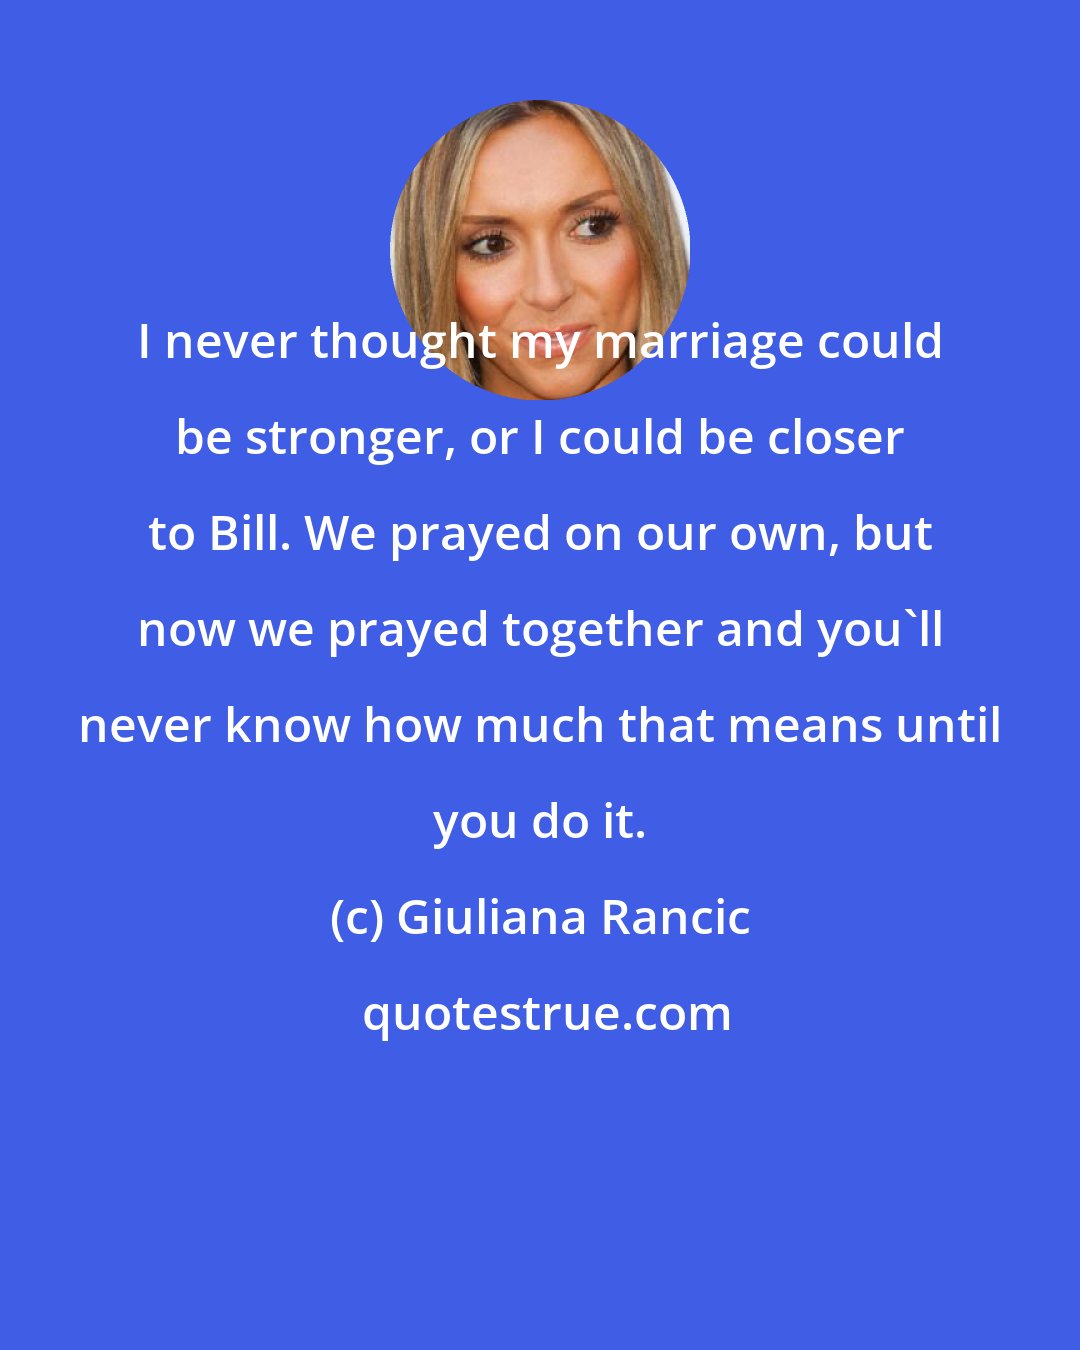 Giuliana Rancic: I never thought my marriage could be stronger, or I could be closer to Bill. We prayed on our own, but now we prayed together and you'll never know how much that means until you do it.